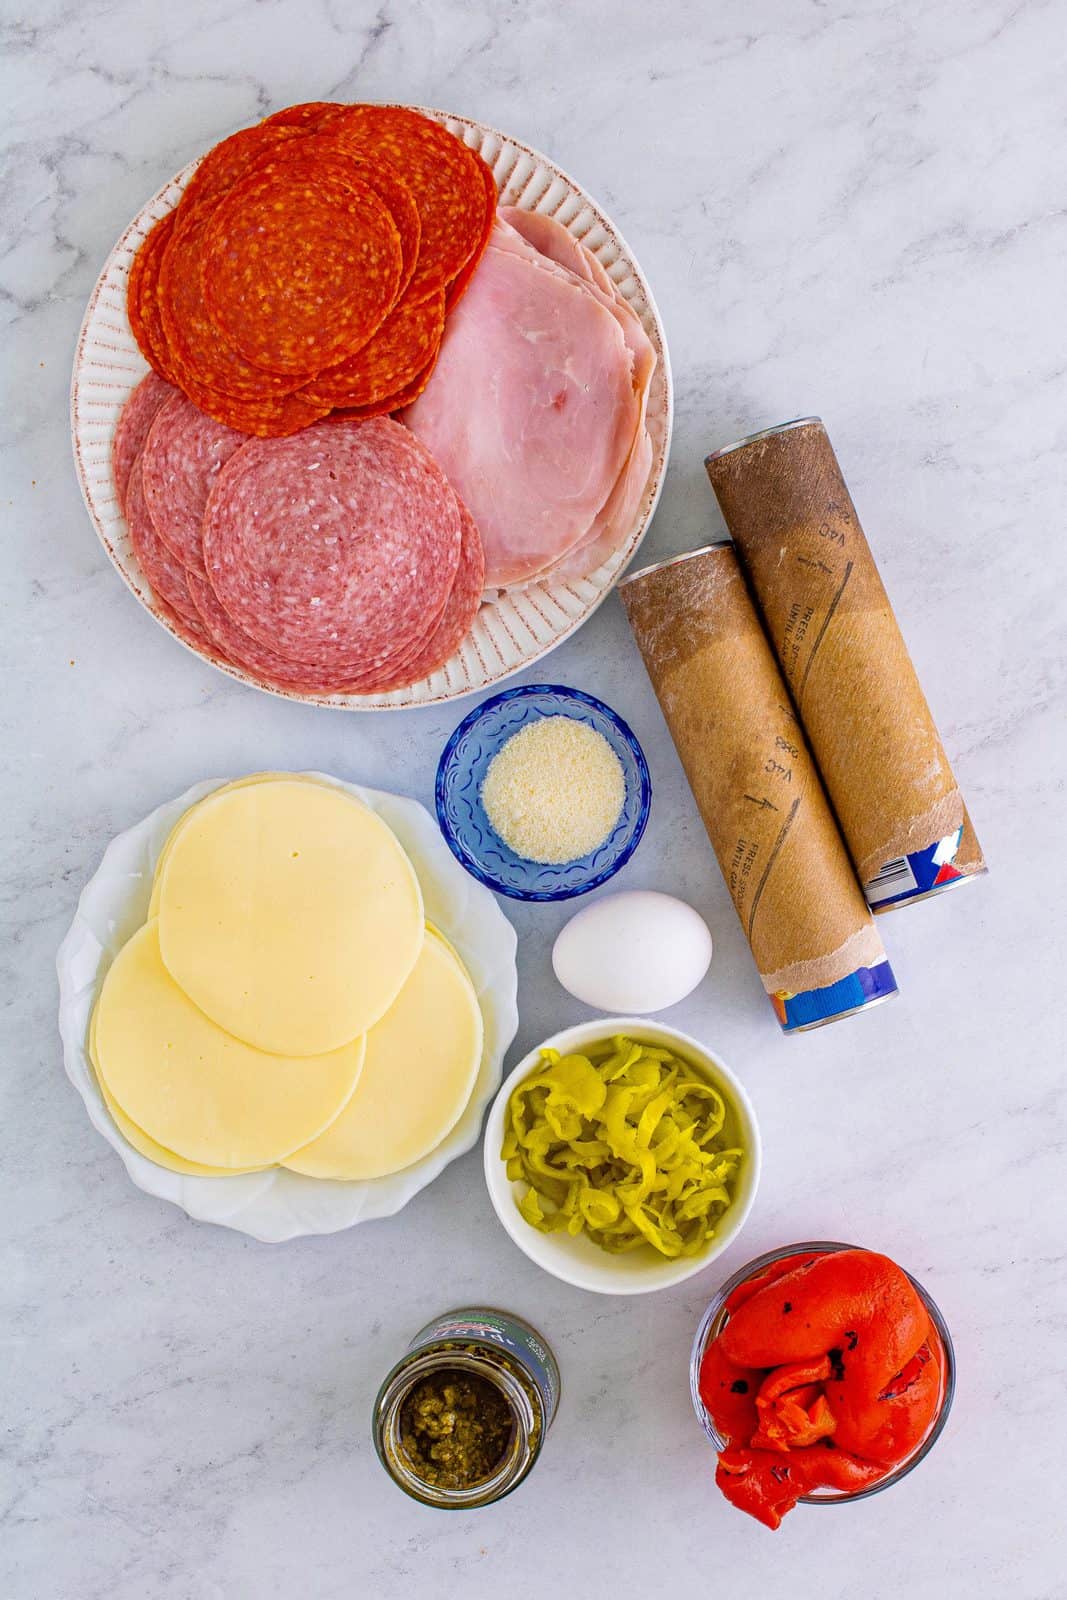 Ingredients needed: crescent roll dough sheets, provolone cheese, pepperoni, deli ham, genoa salami, roasted red bell peppers, pepperoncini’s, egg, pesto and parmesan cheese.